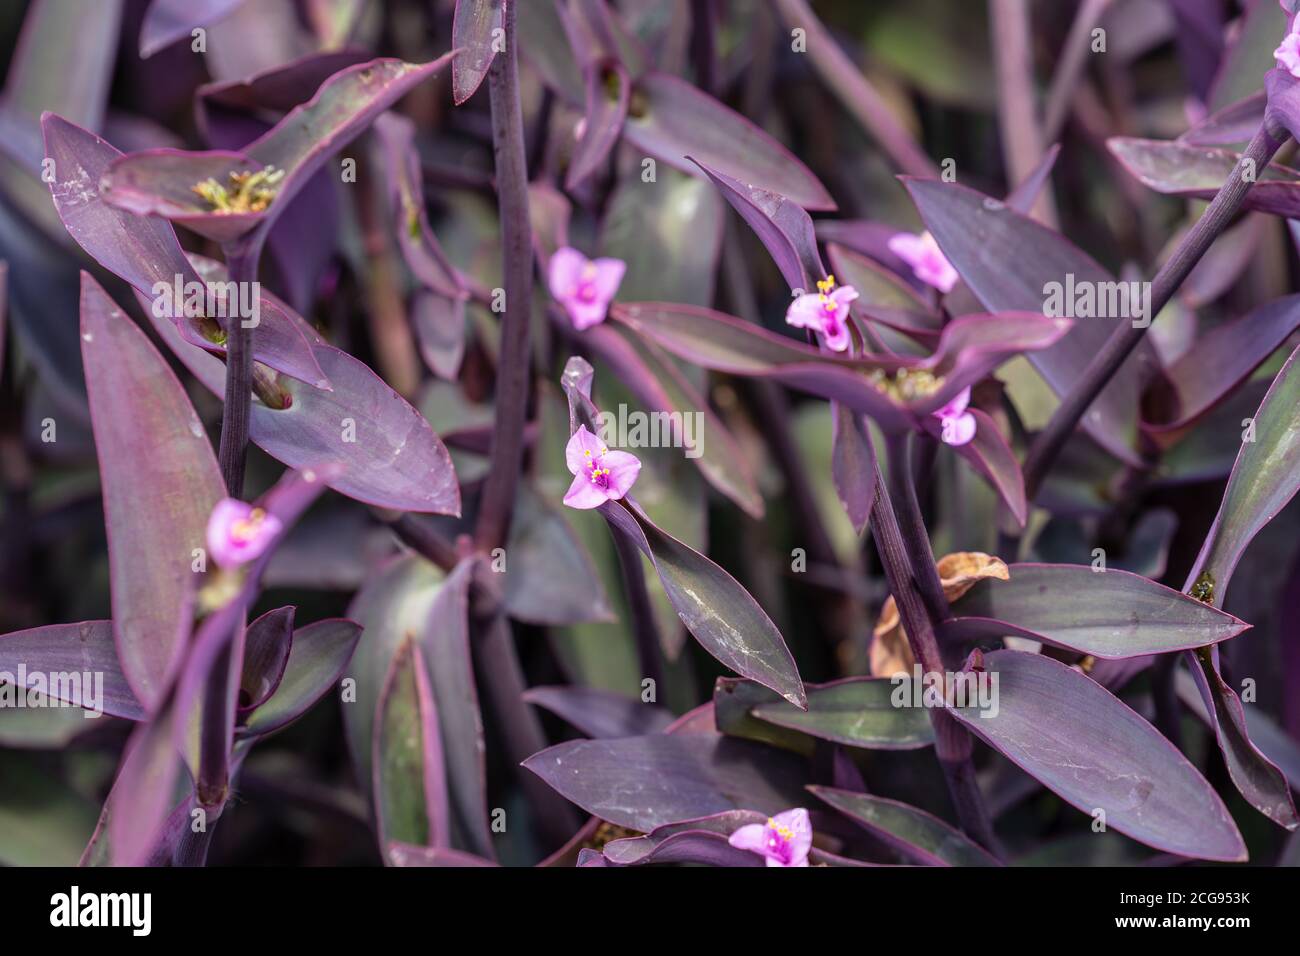 Tradescantia pallida more commonly known as wandering jew or walking jew. Other common names include purple secretia, purple-heart, purple queen Stock Photo